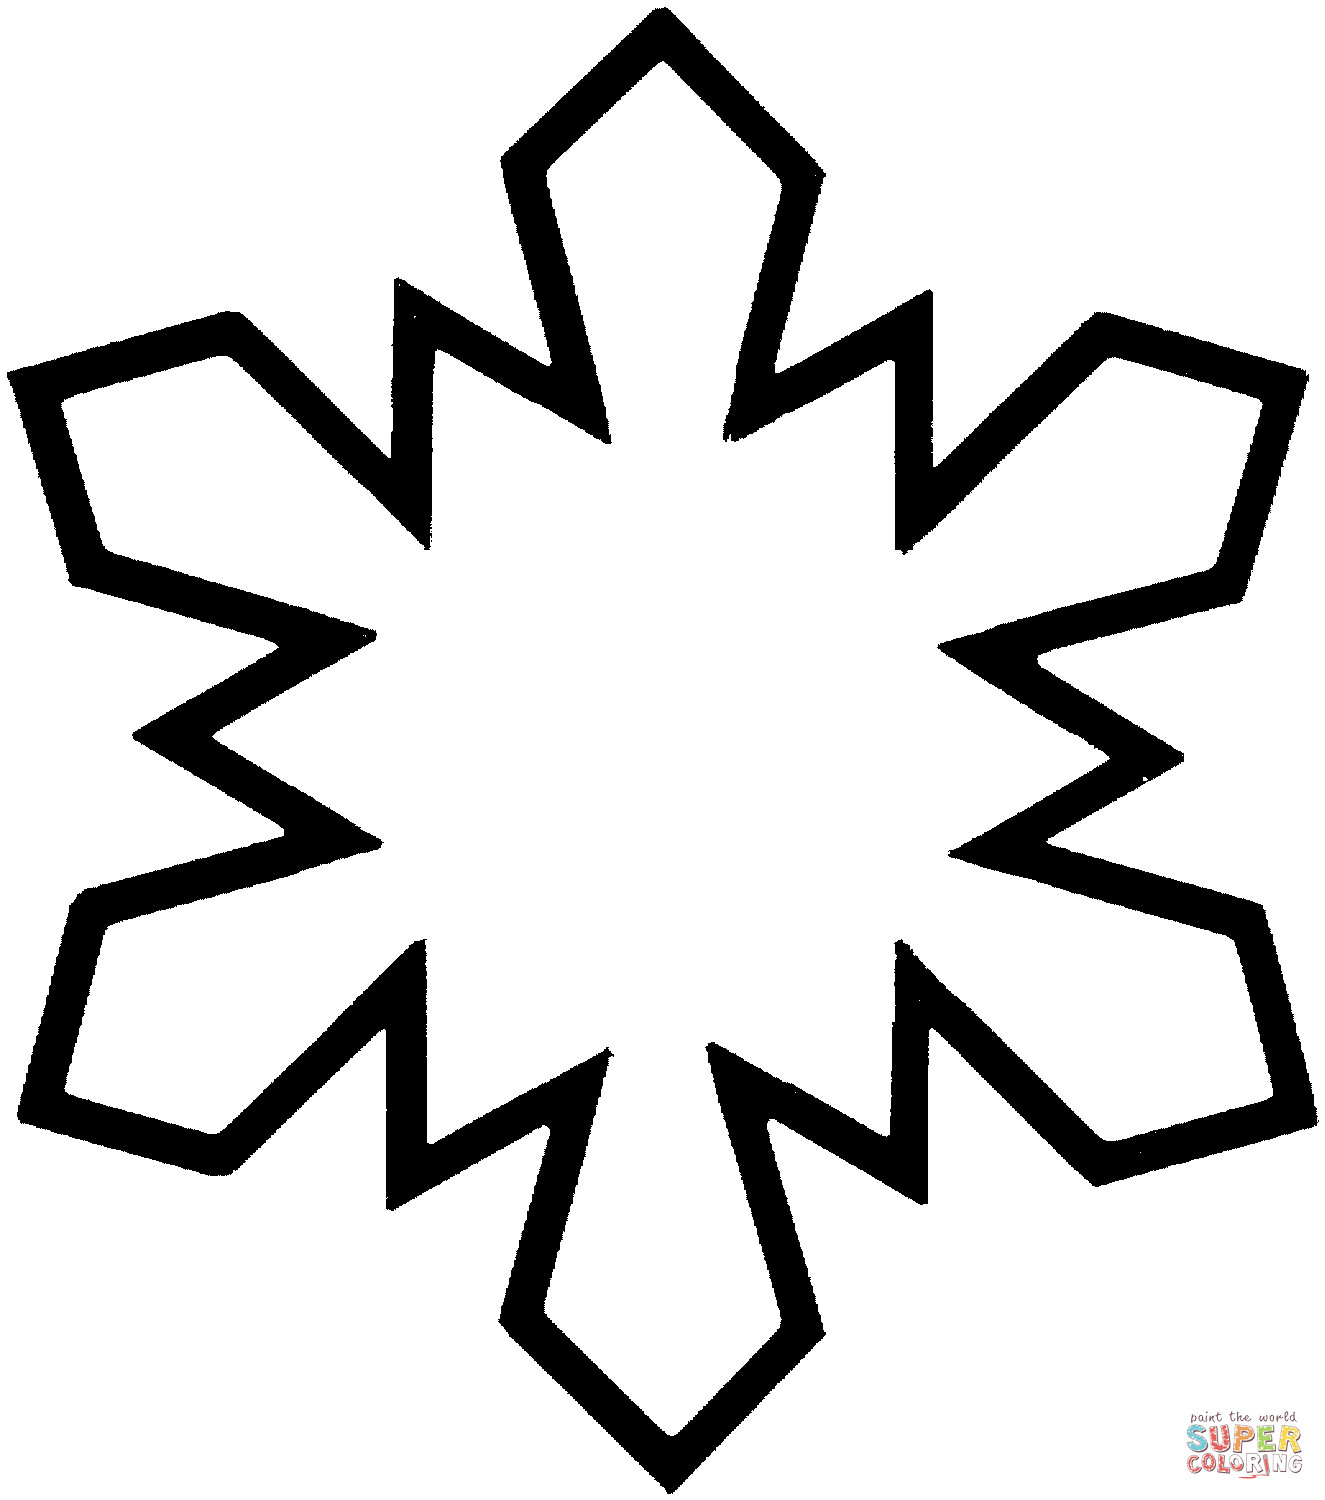 Snowflake Coloring Pages Printable
 Simple snowflake coloring page